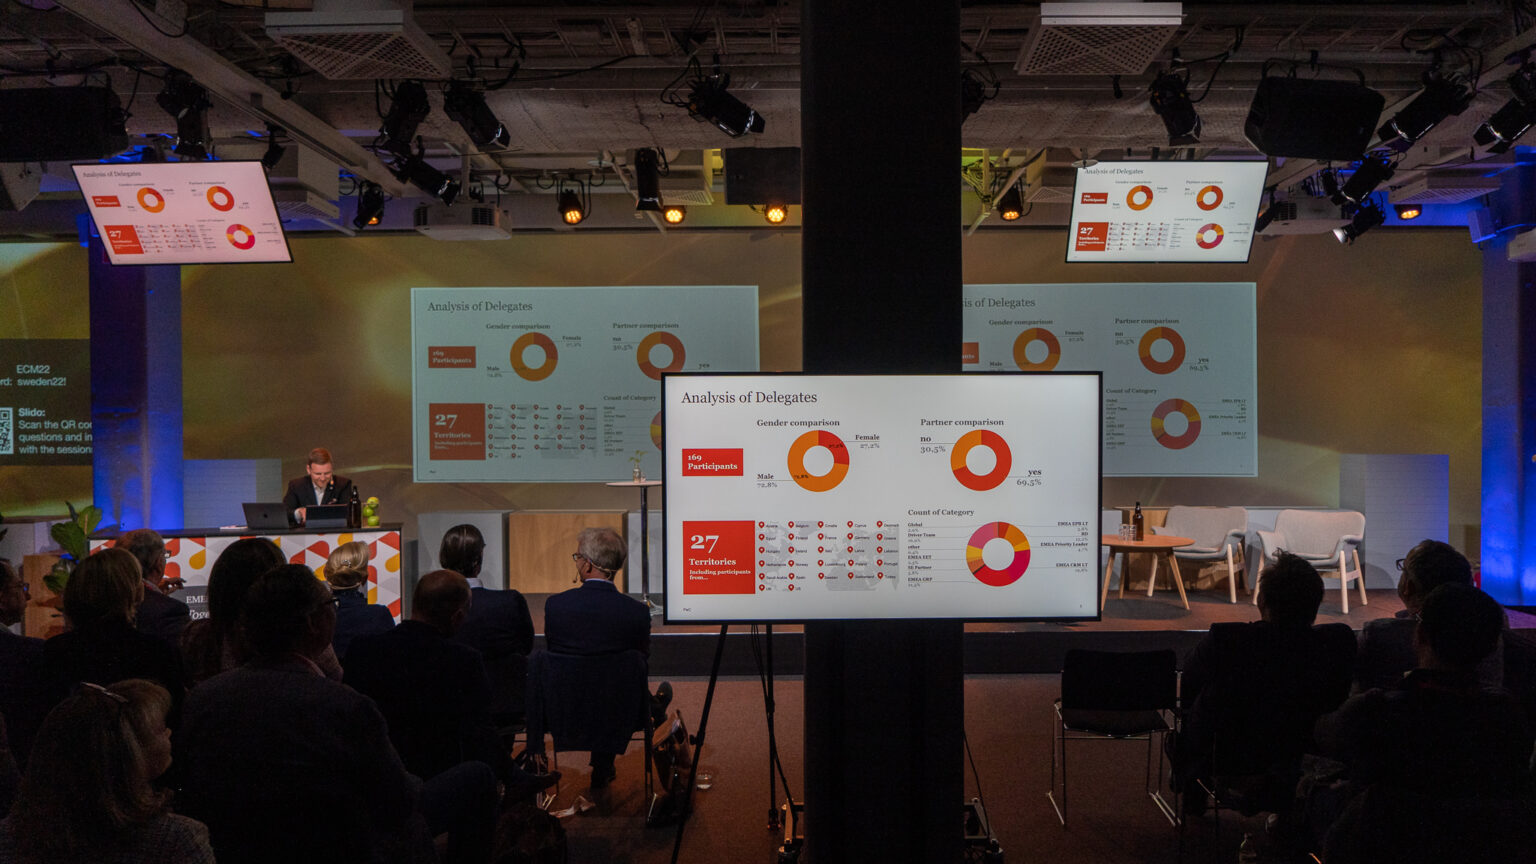 PwC organised an interactive conference with recording at Fotografiska